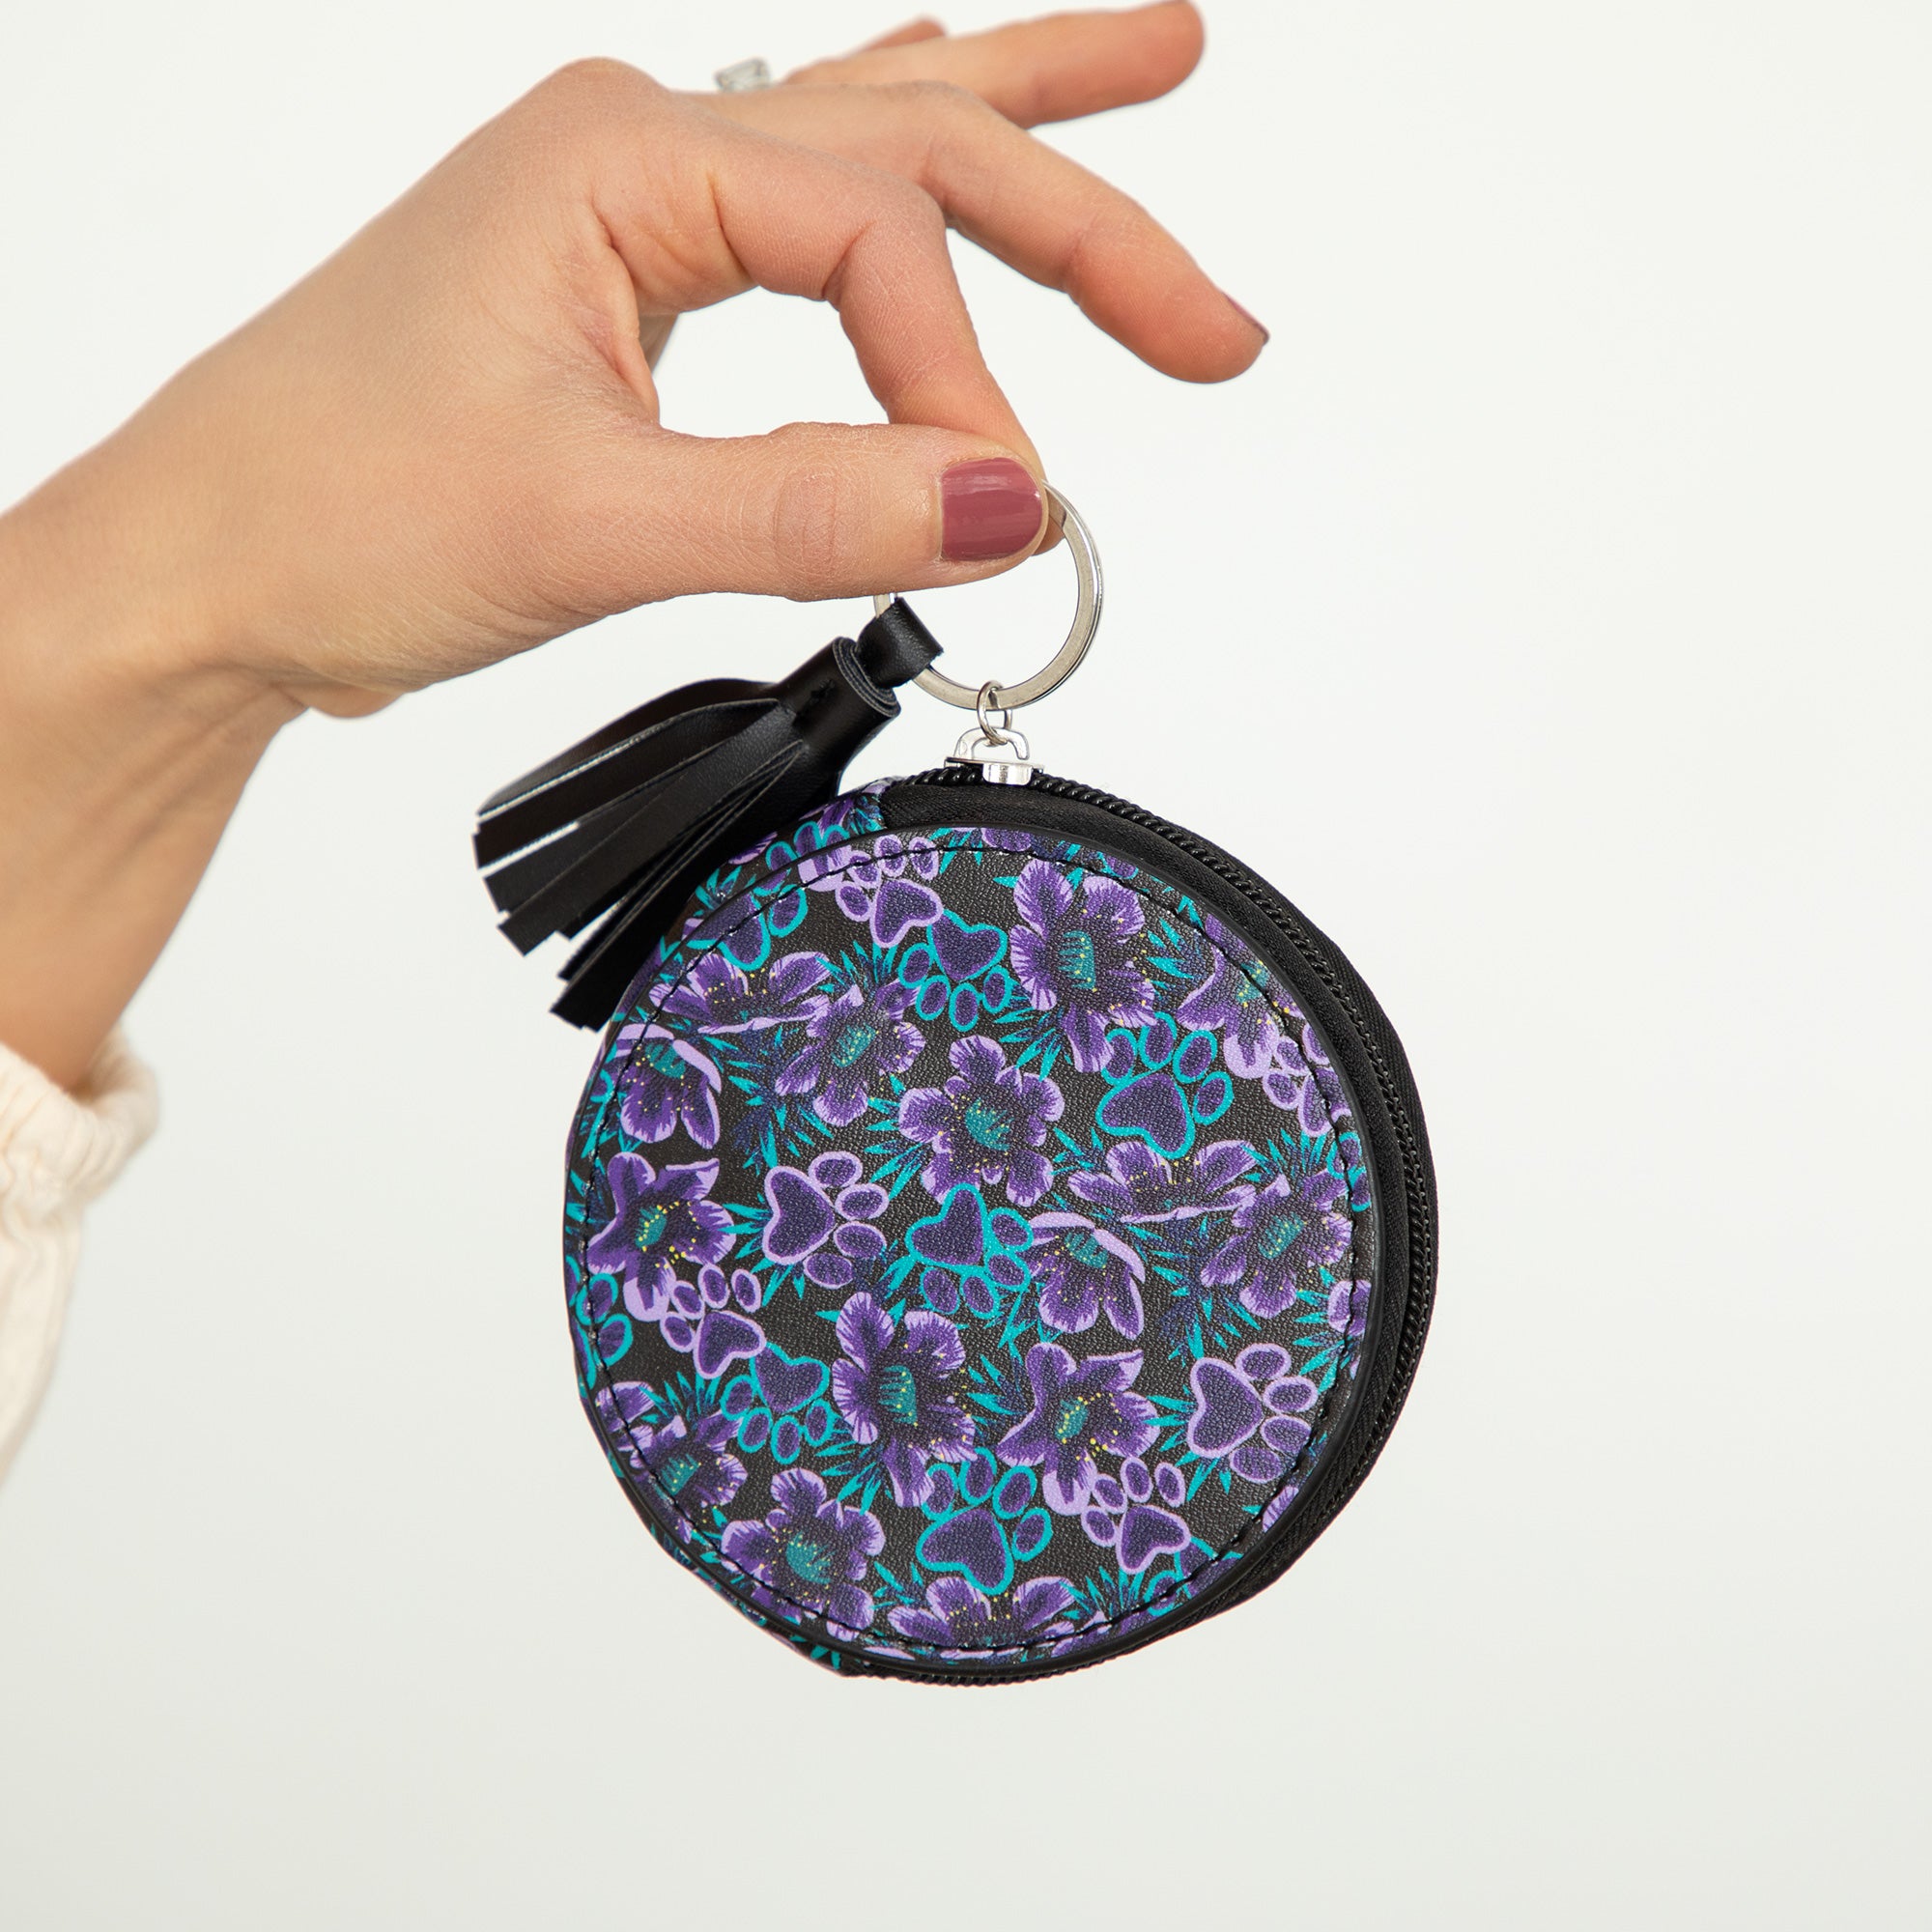 Midnight Floral Paw Print Bags - Coin Purse